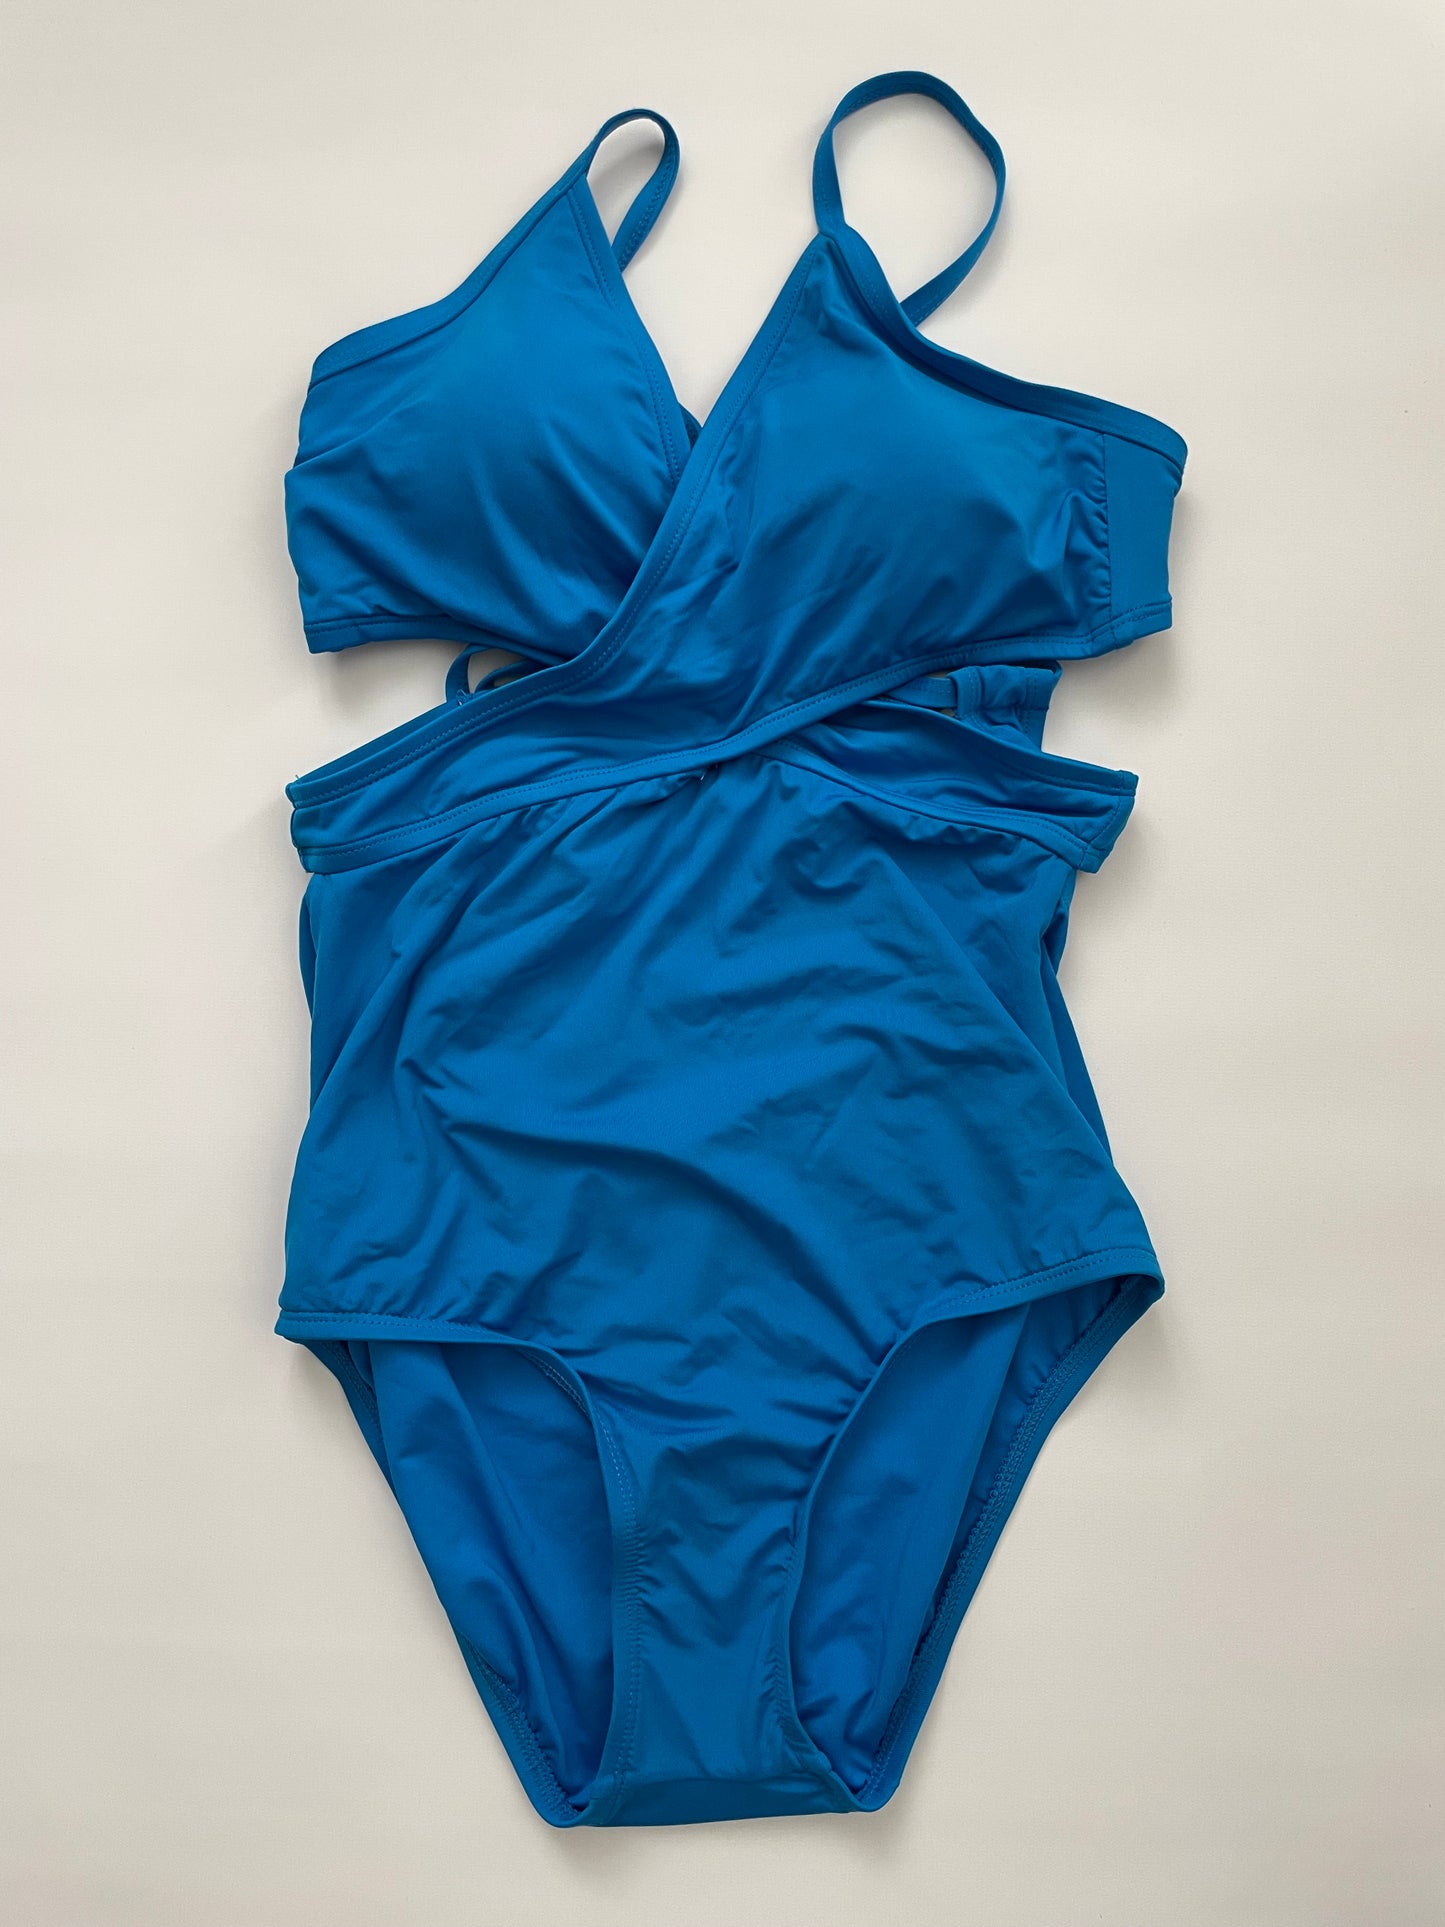 Laundry One Piece Swimsuit, NWT, M